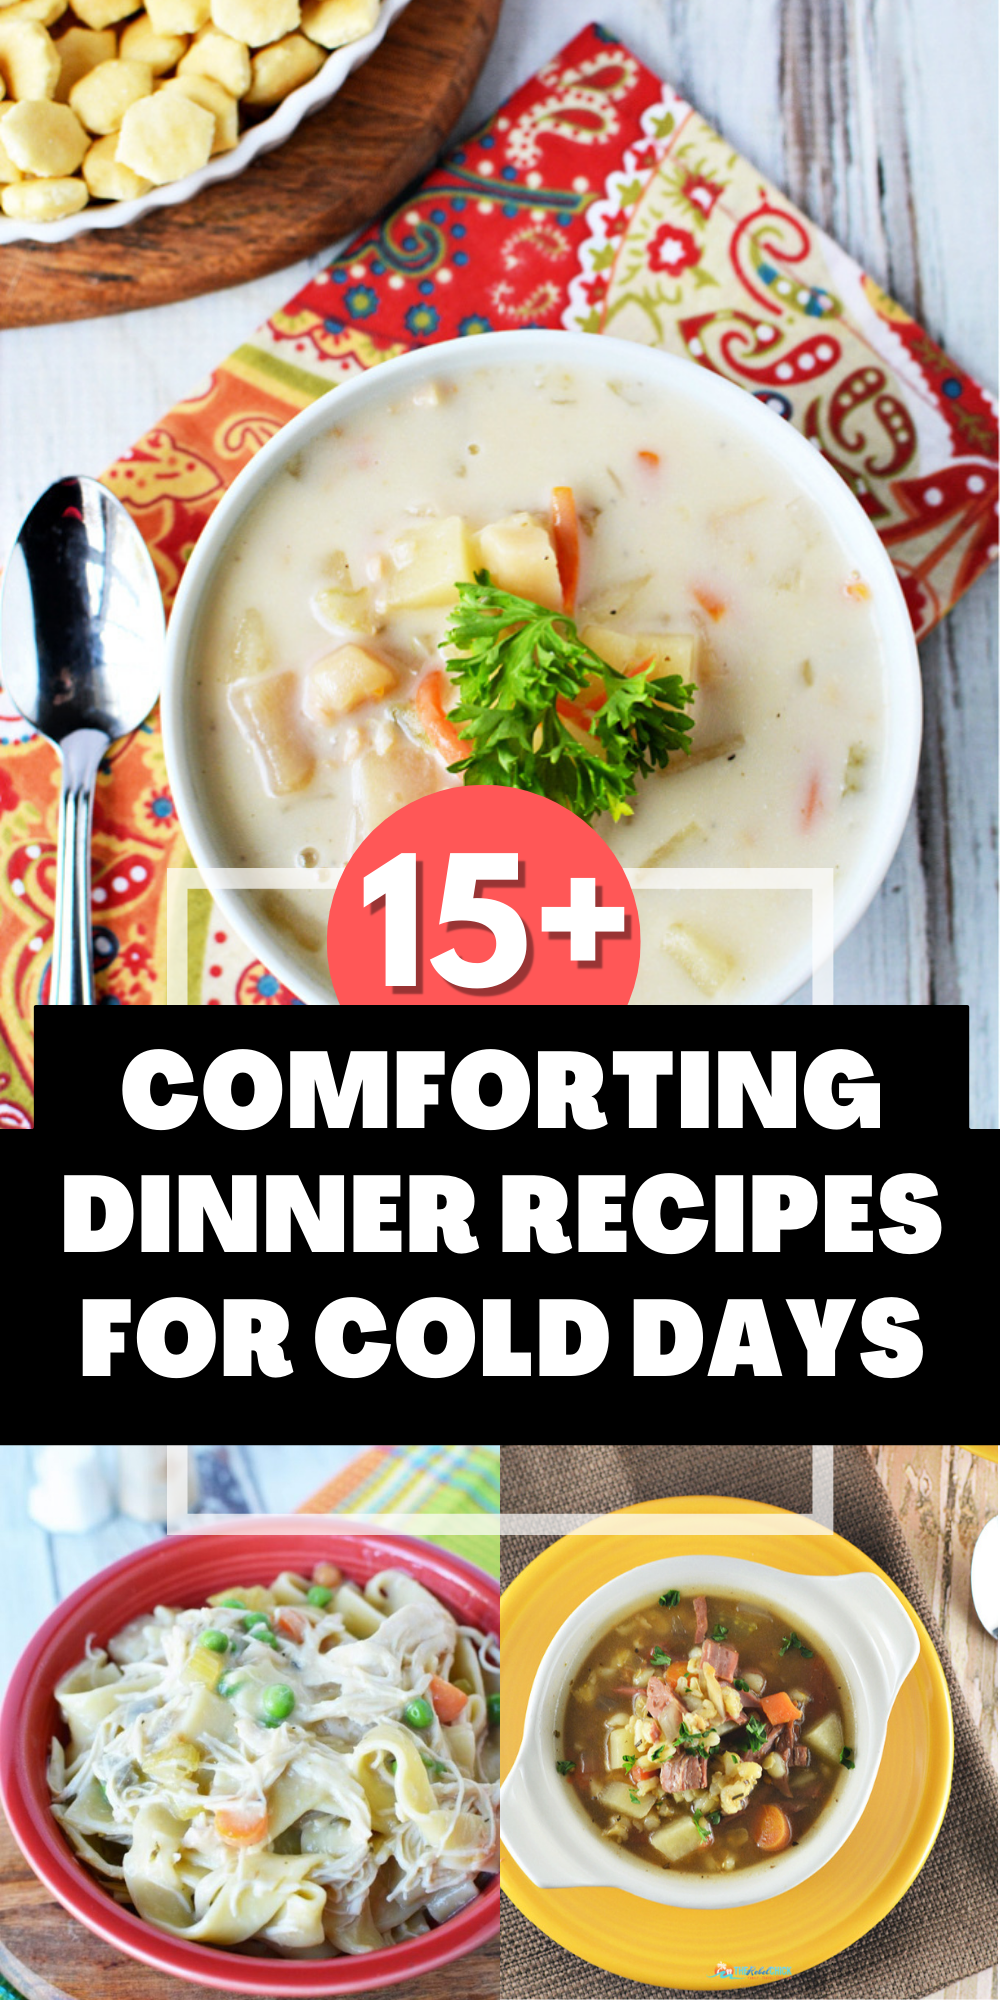 15+ Comforting Dinners for Cold Days